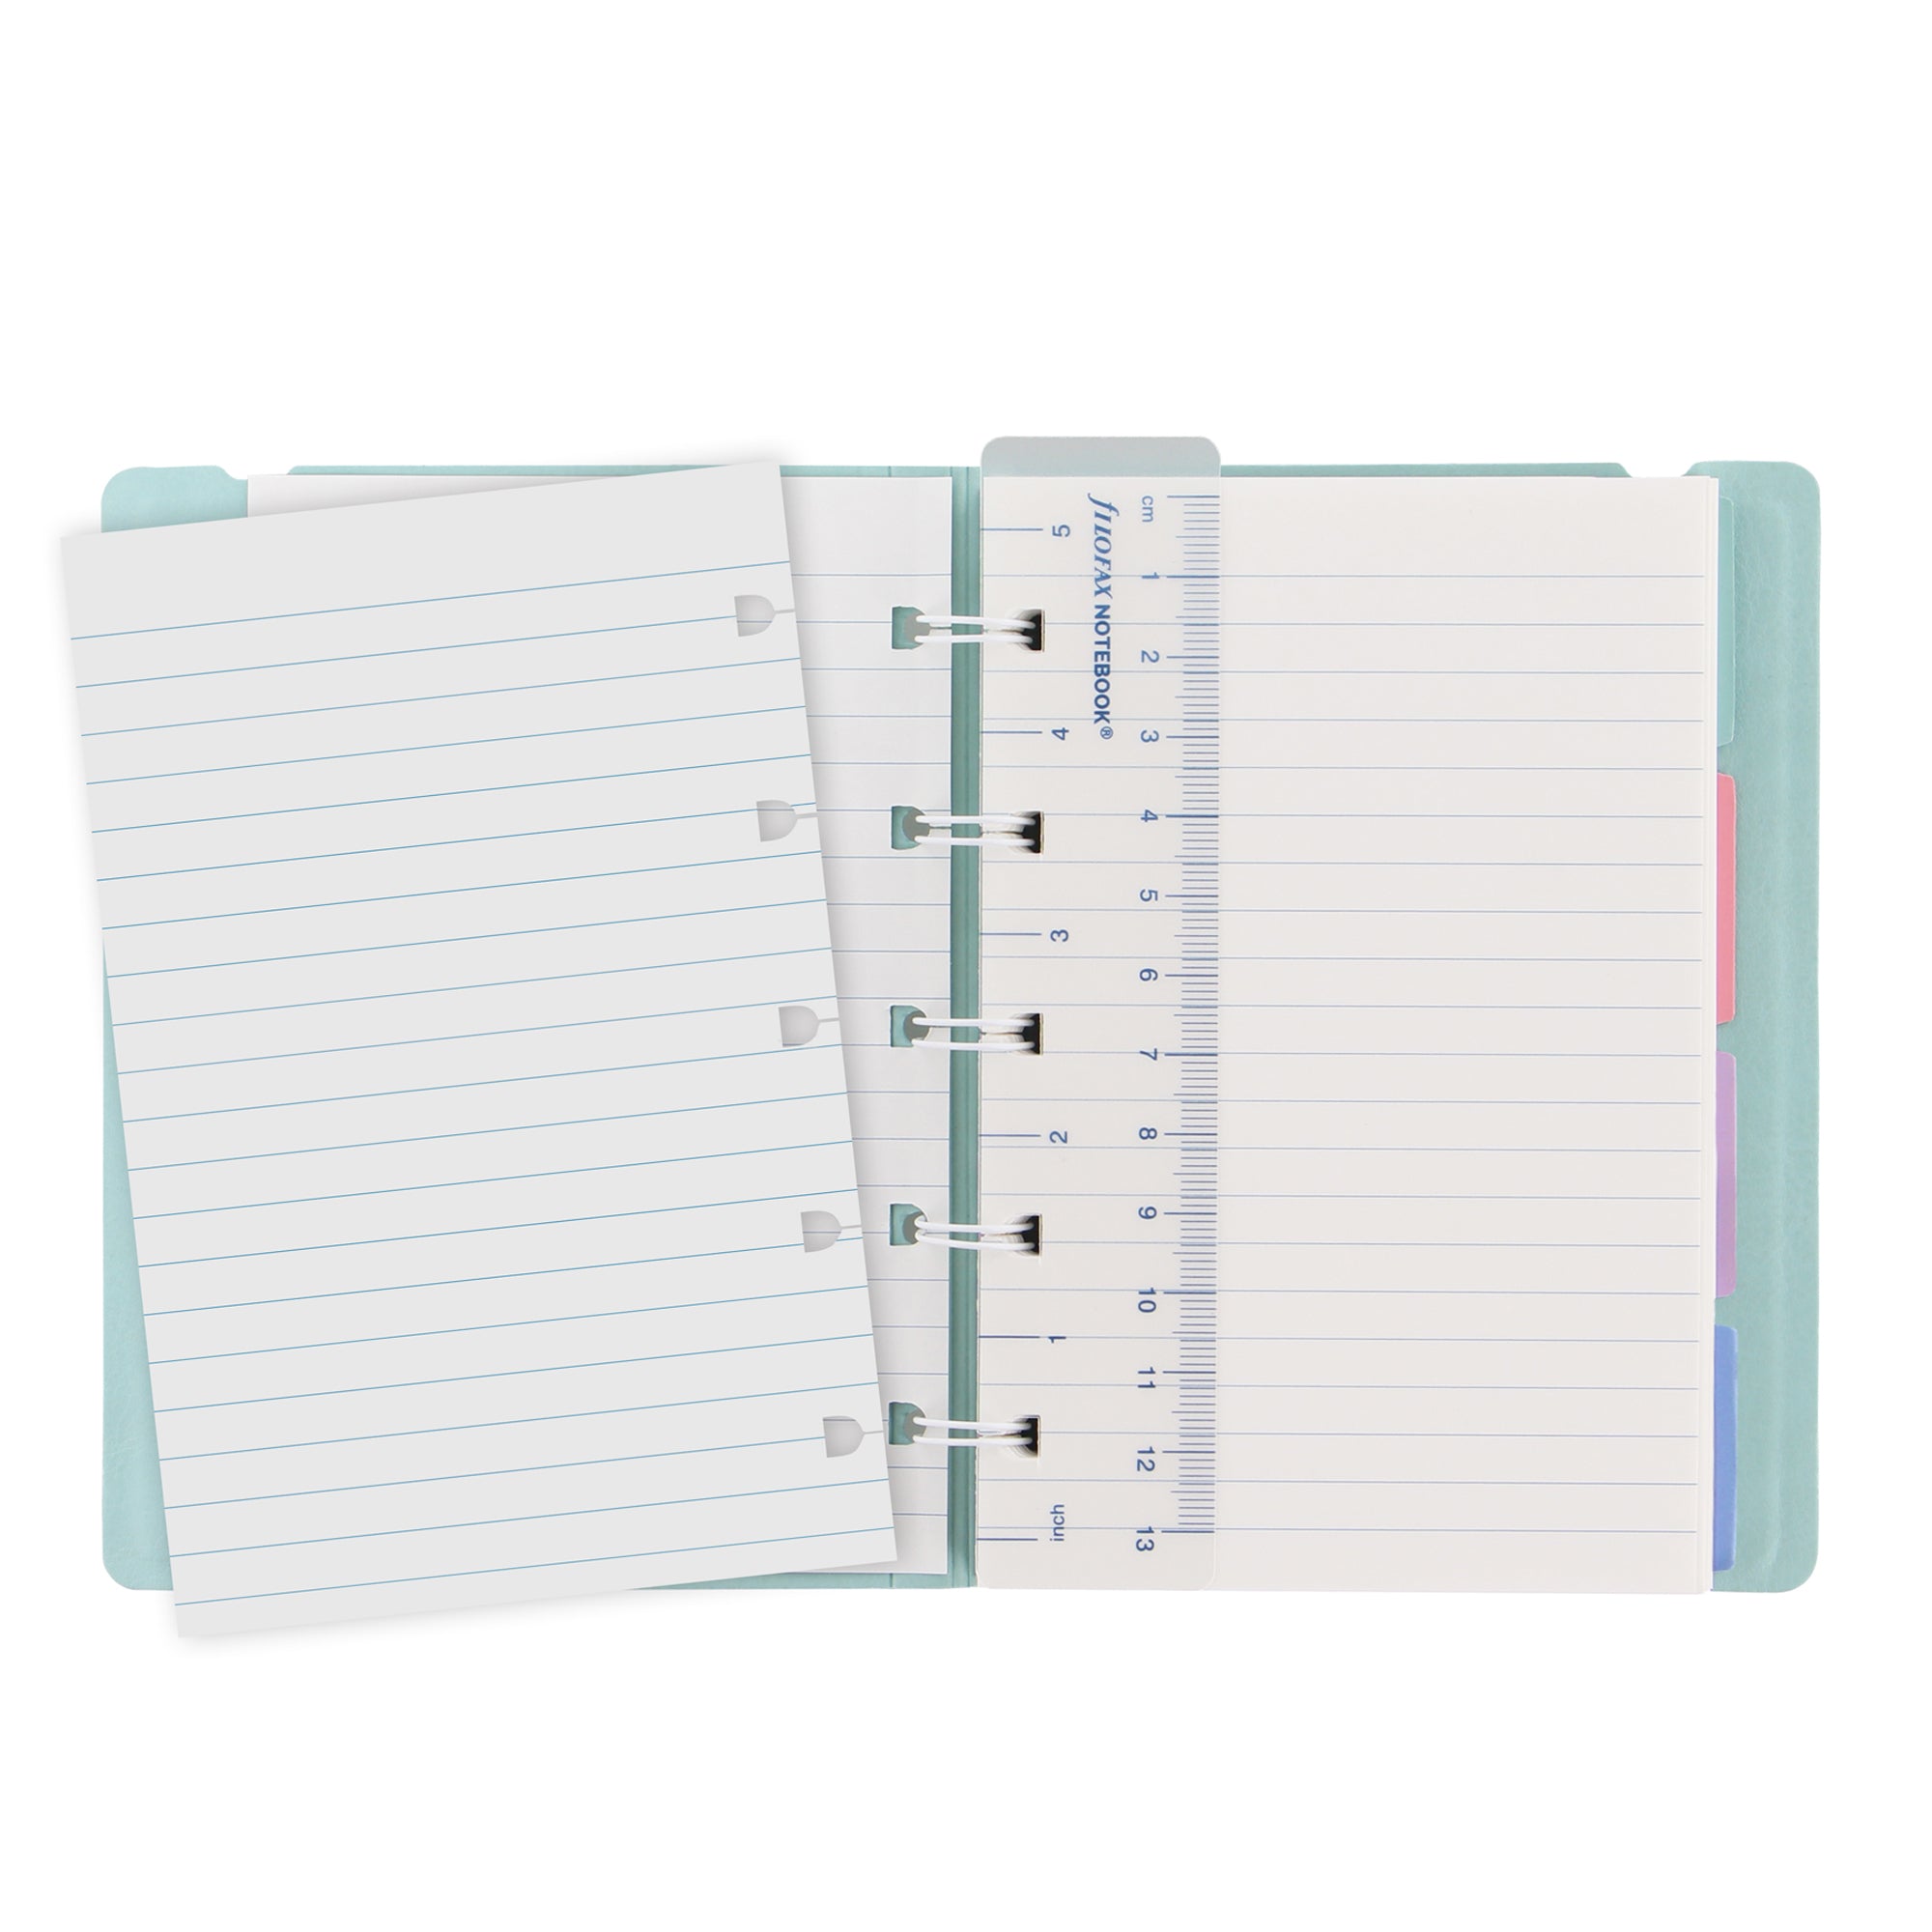 filofax-notebook-pocket-f-to-144x105mm-righe-56-pag-verde-pastello-similpelle